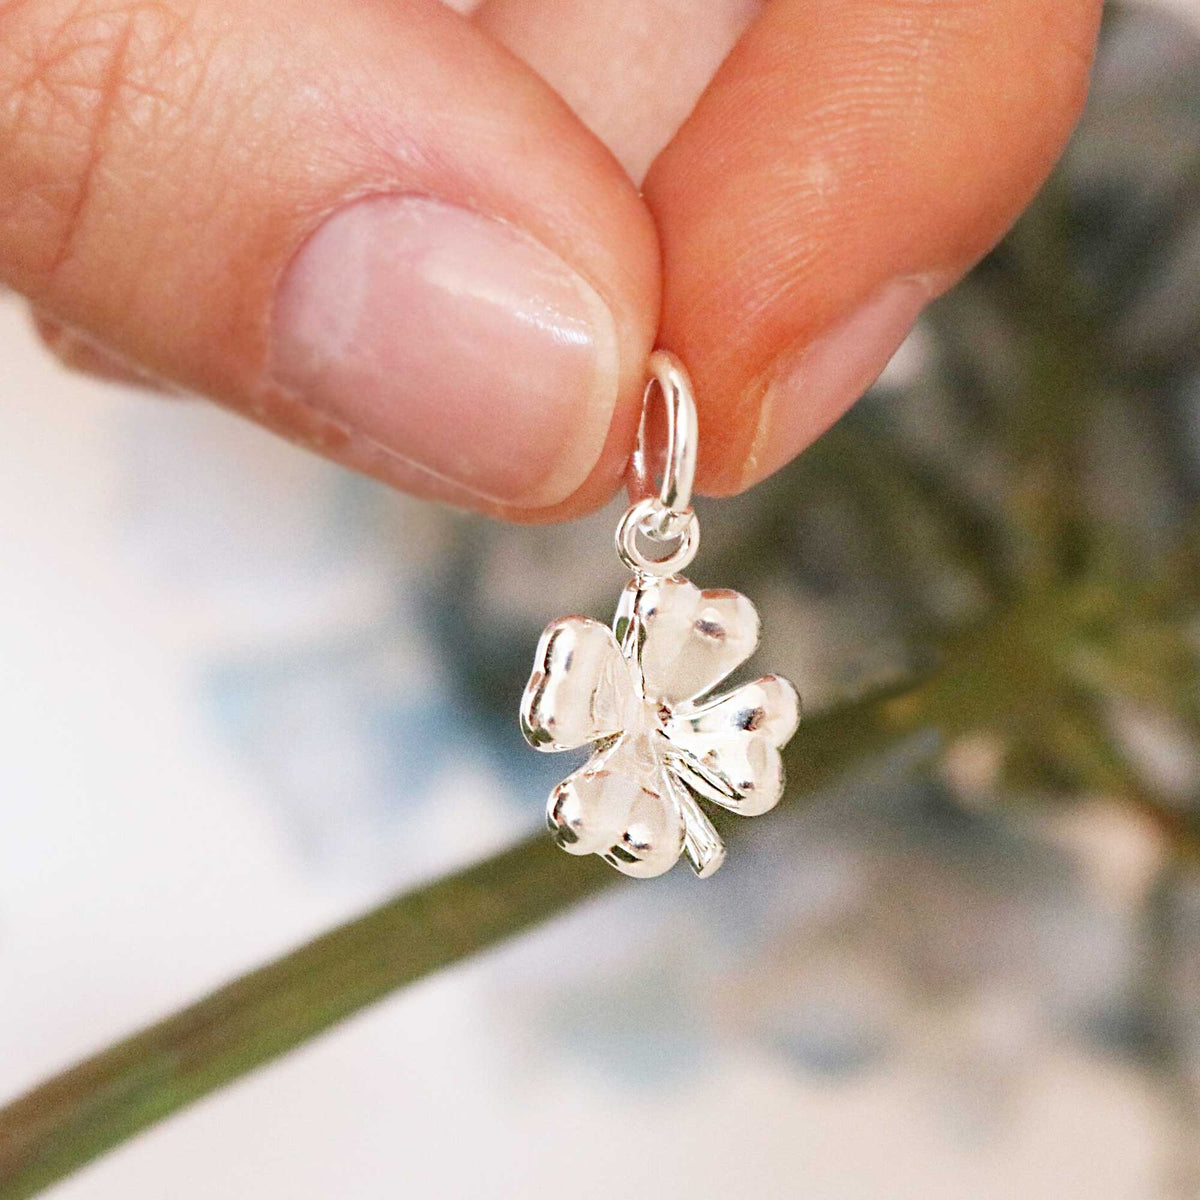 Carry good luck every day with this exquisite silver four leaf clover necklace. FREE UK delivery.